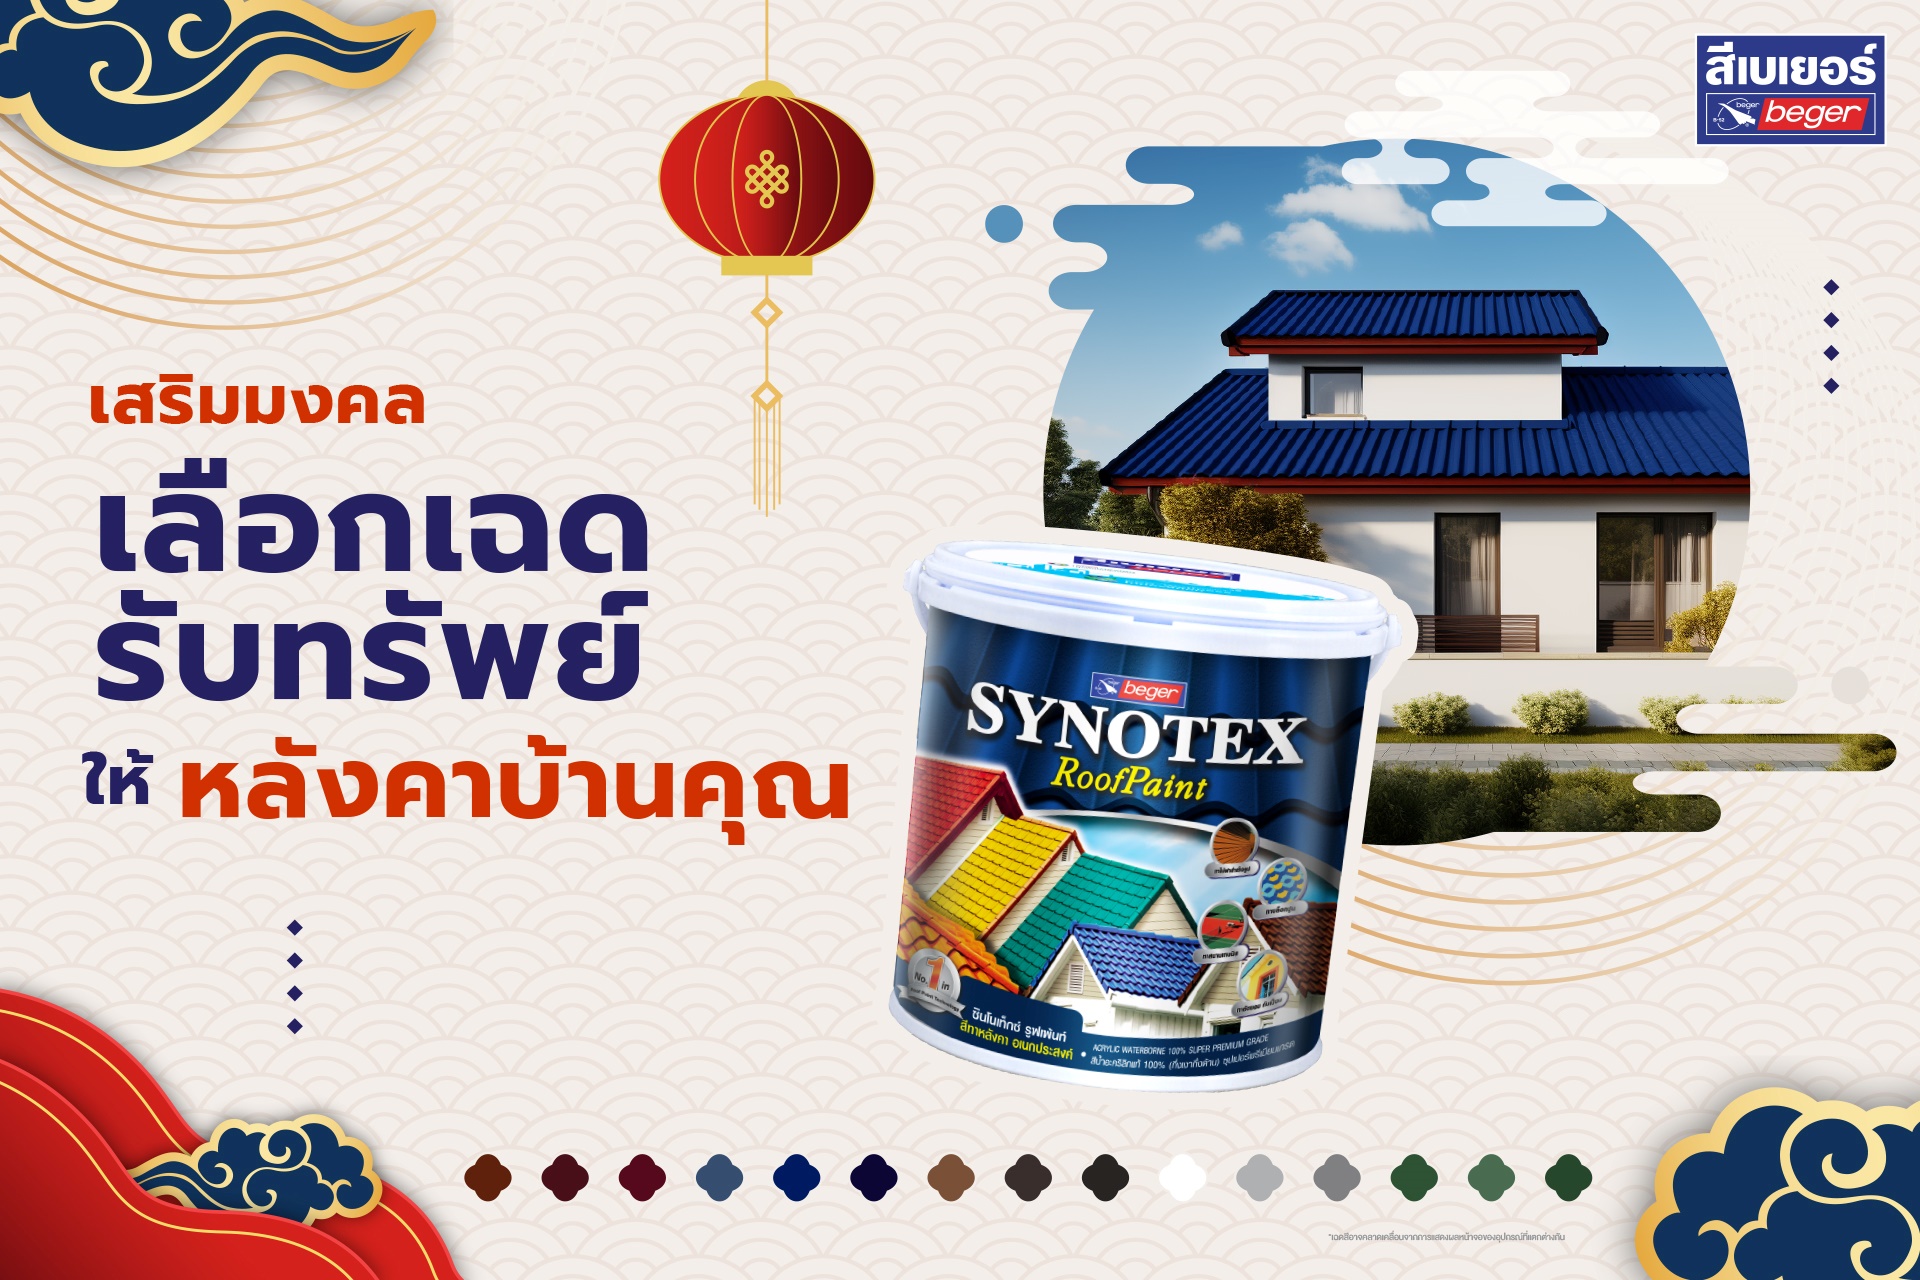 Synotax roof paint